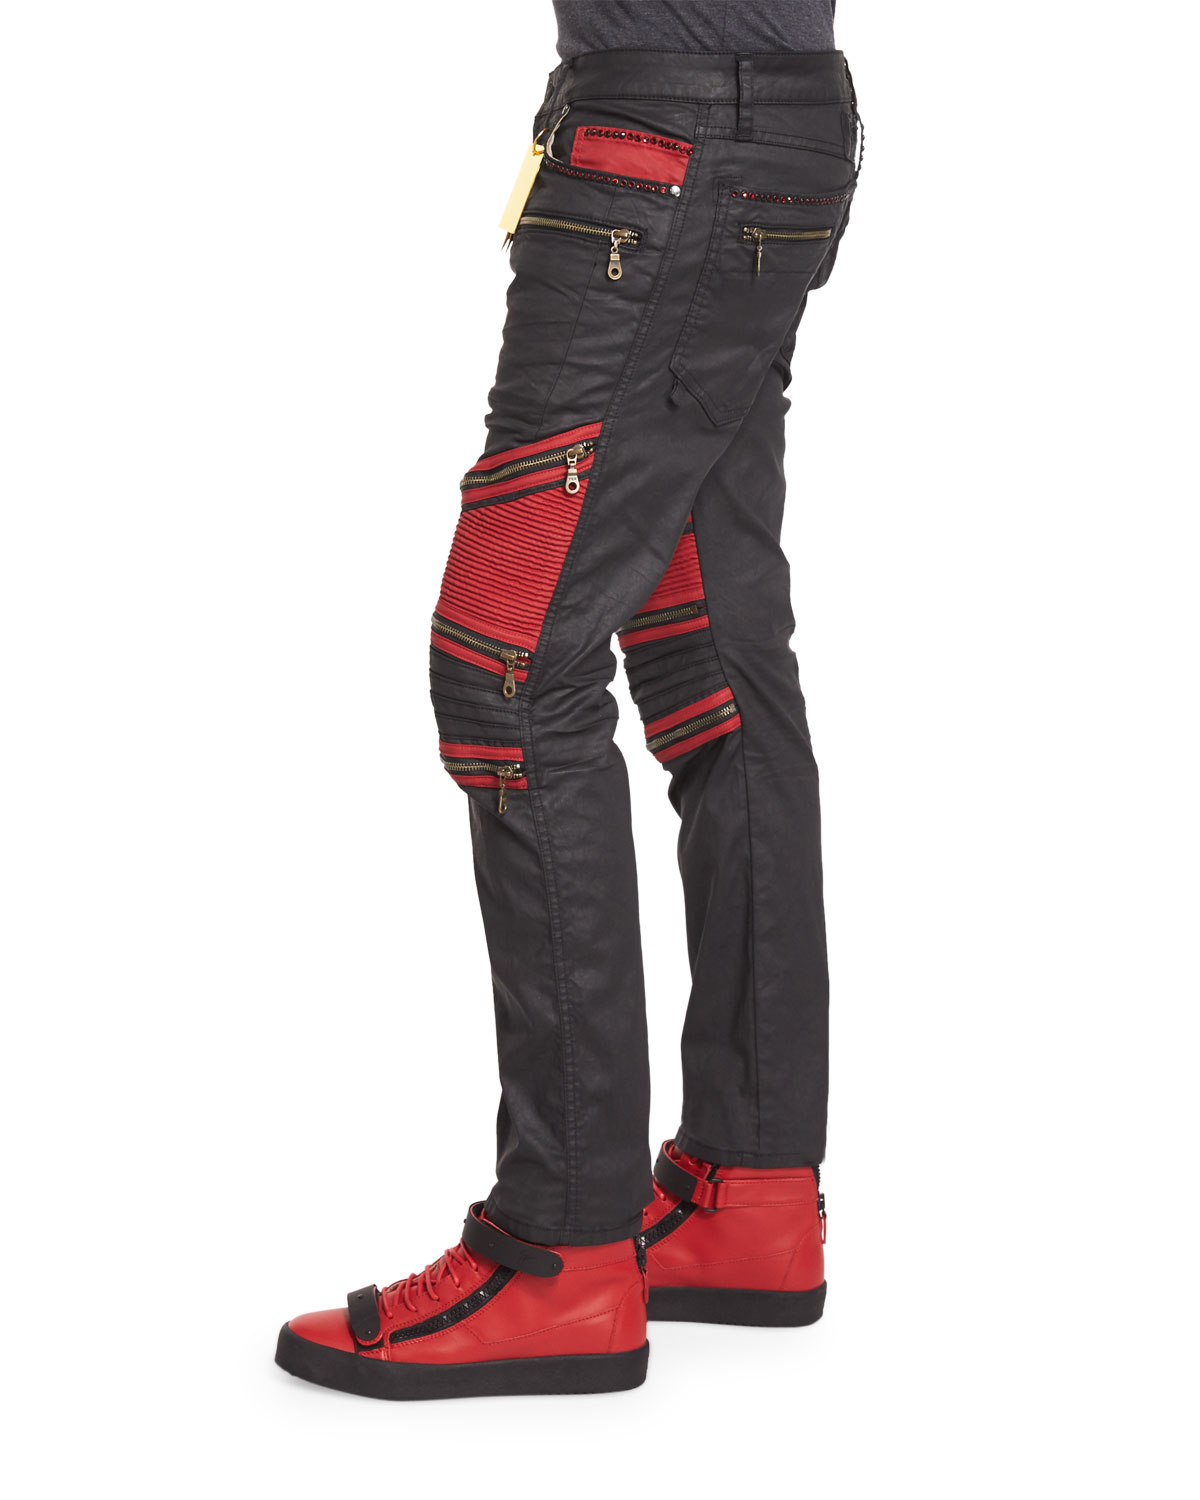 Robins Jeans Men's Clothing